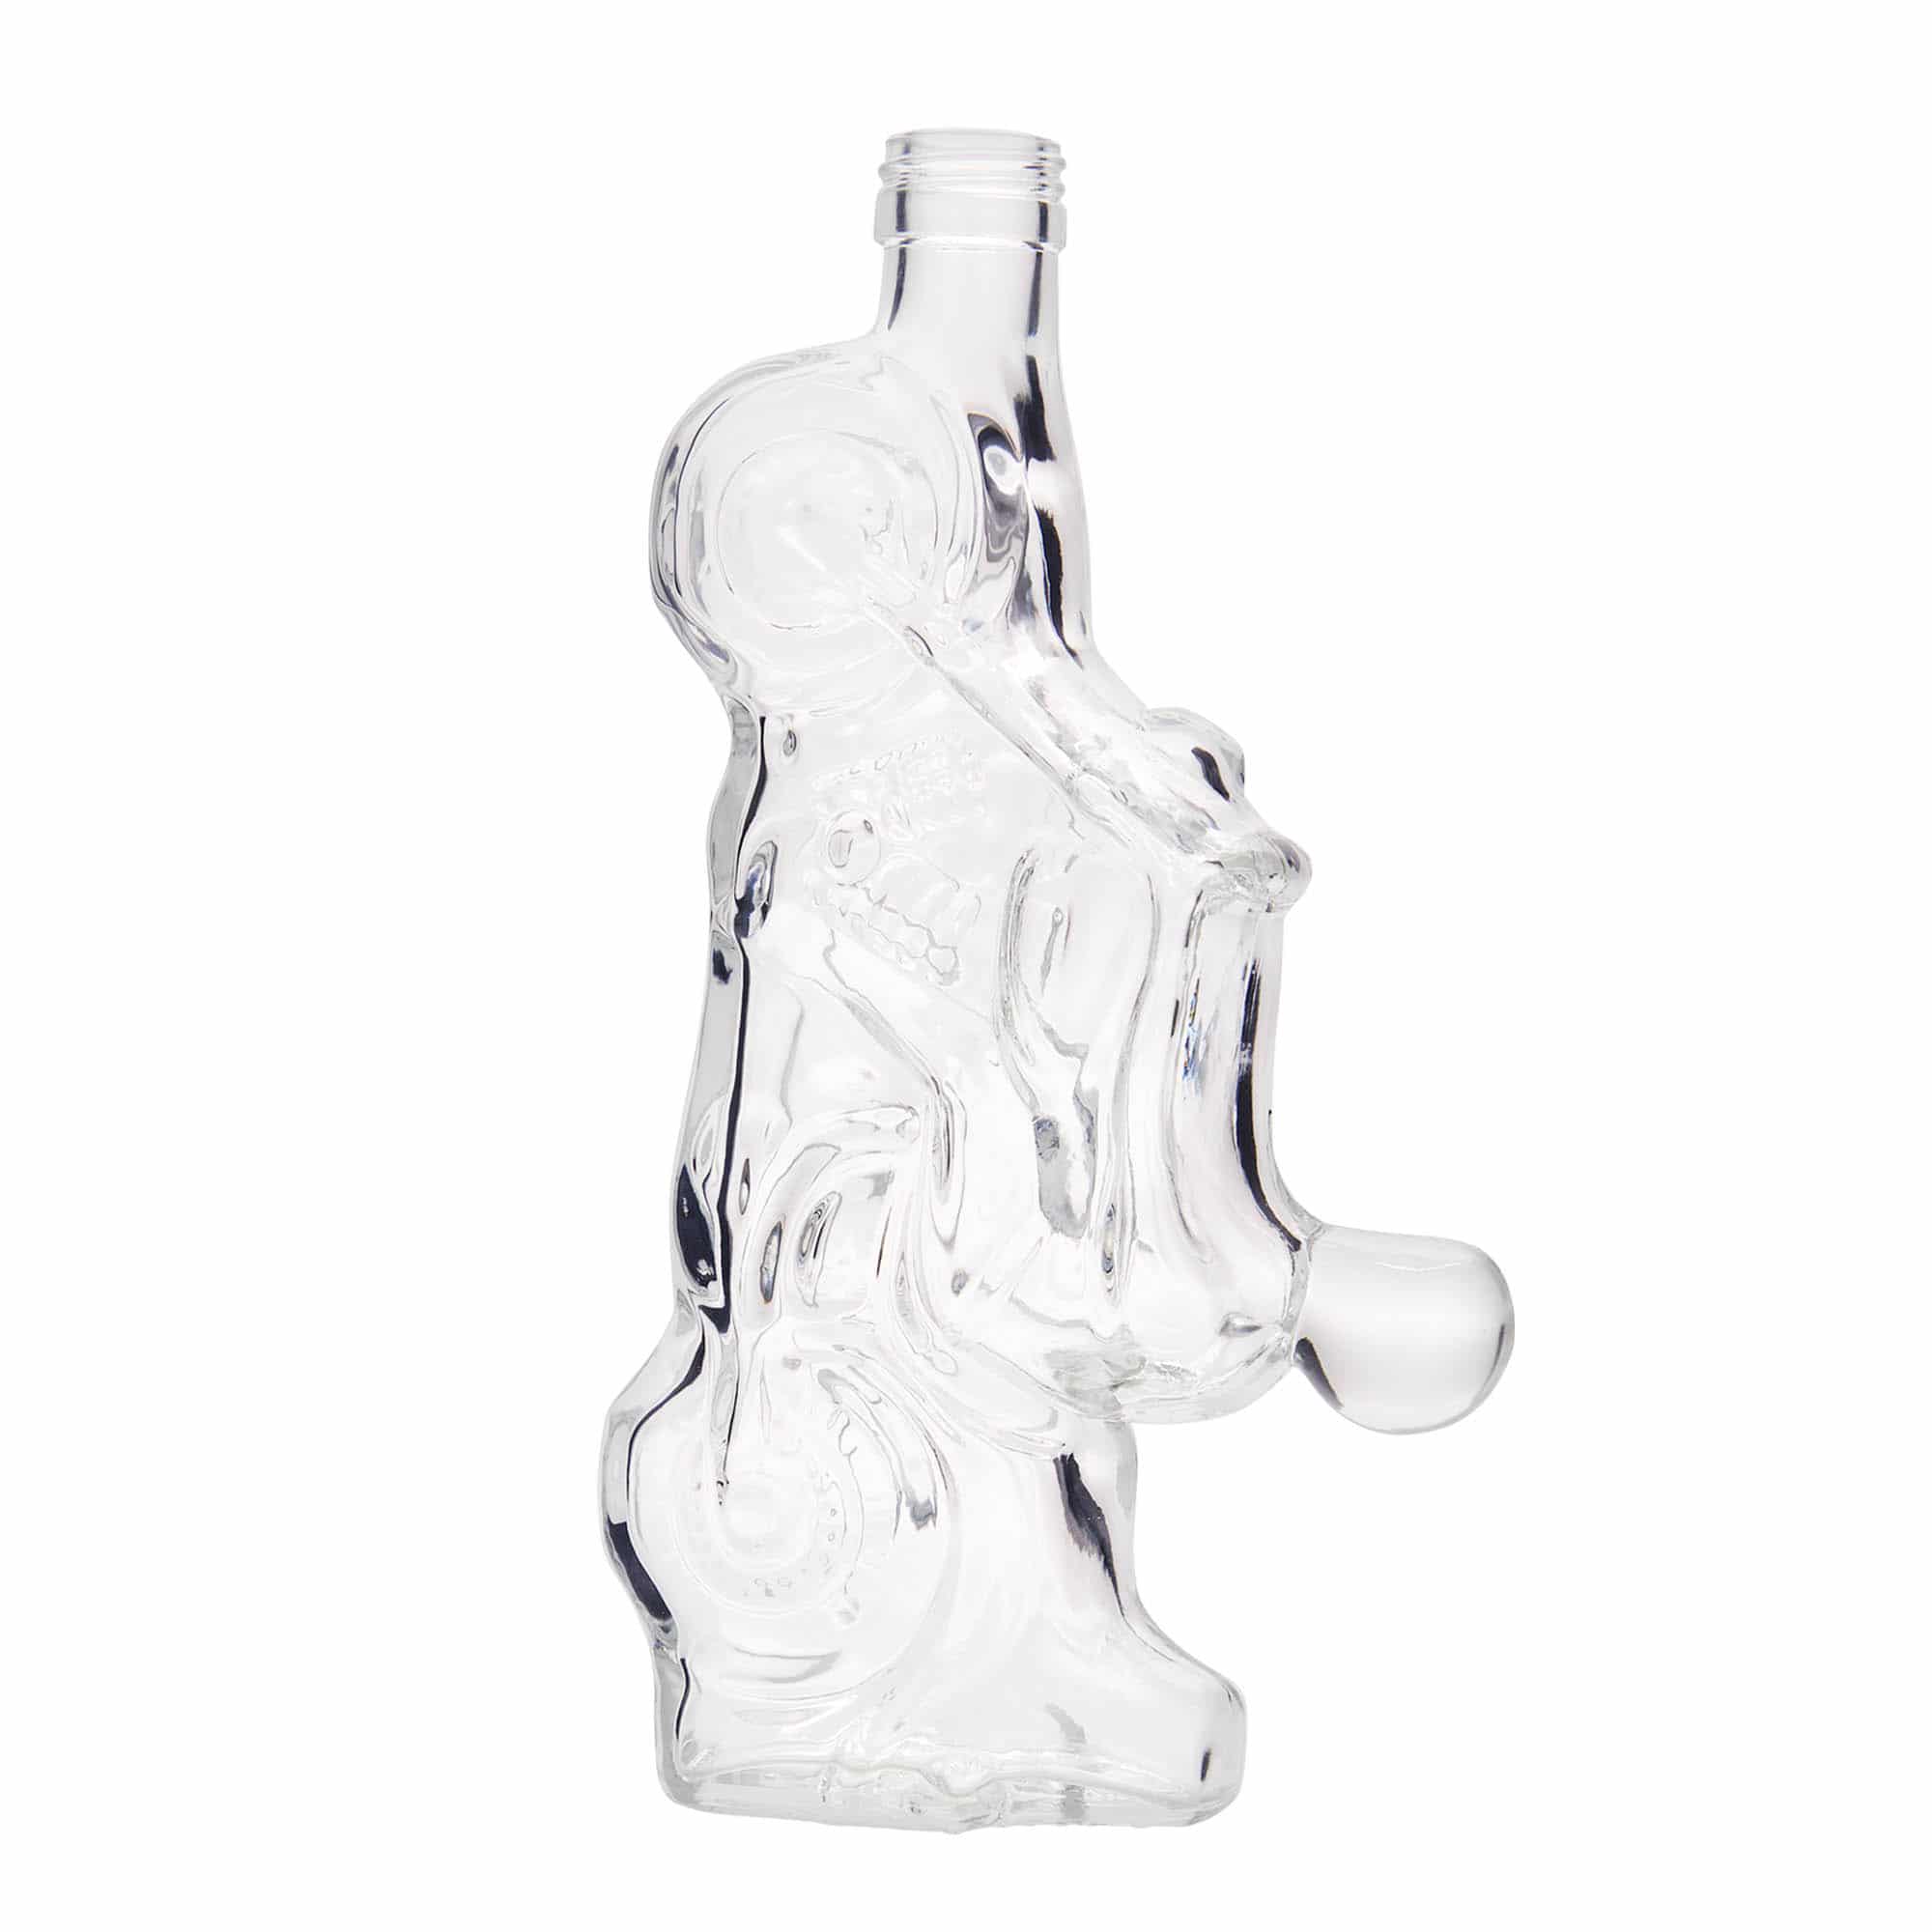 350 ml glass bottle 'Motorcycle', closure: PP 28